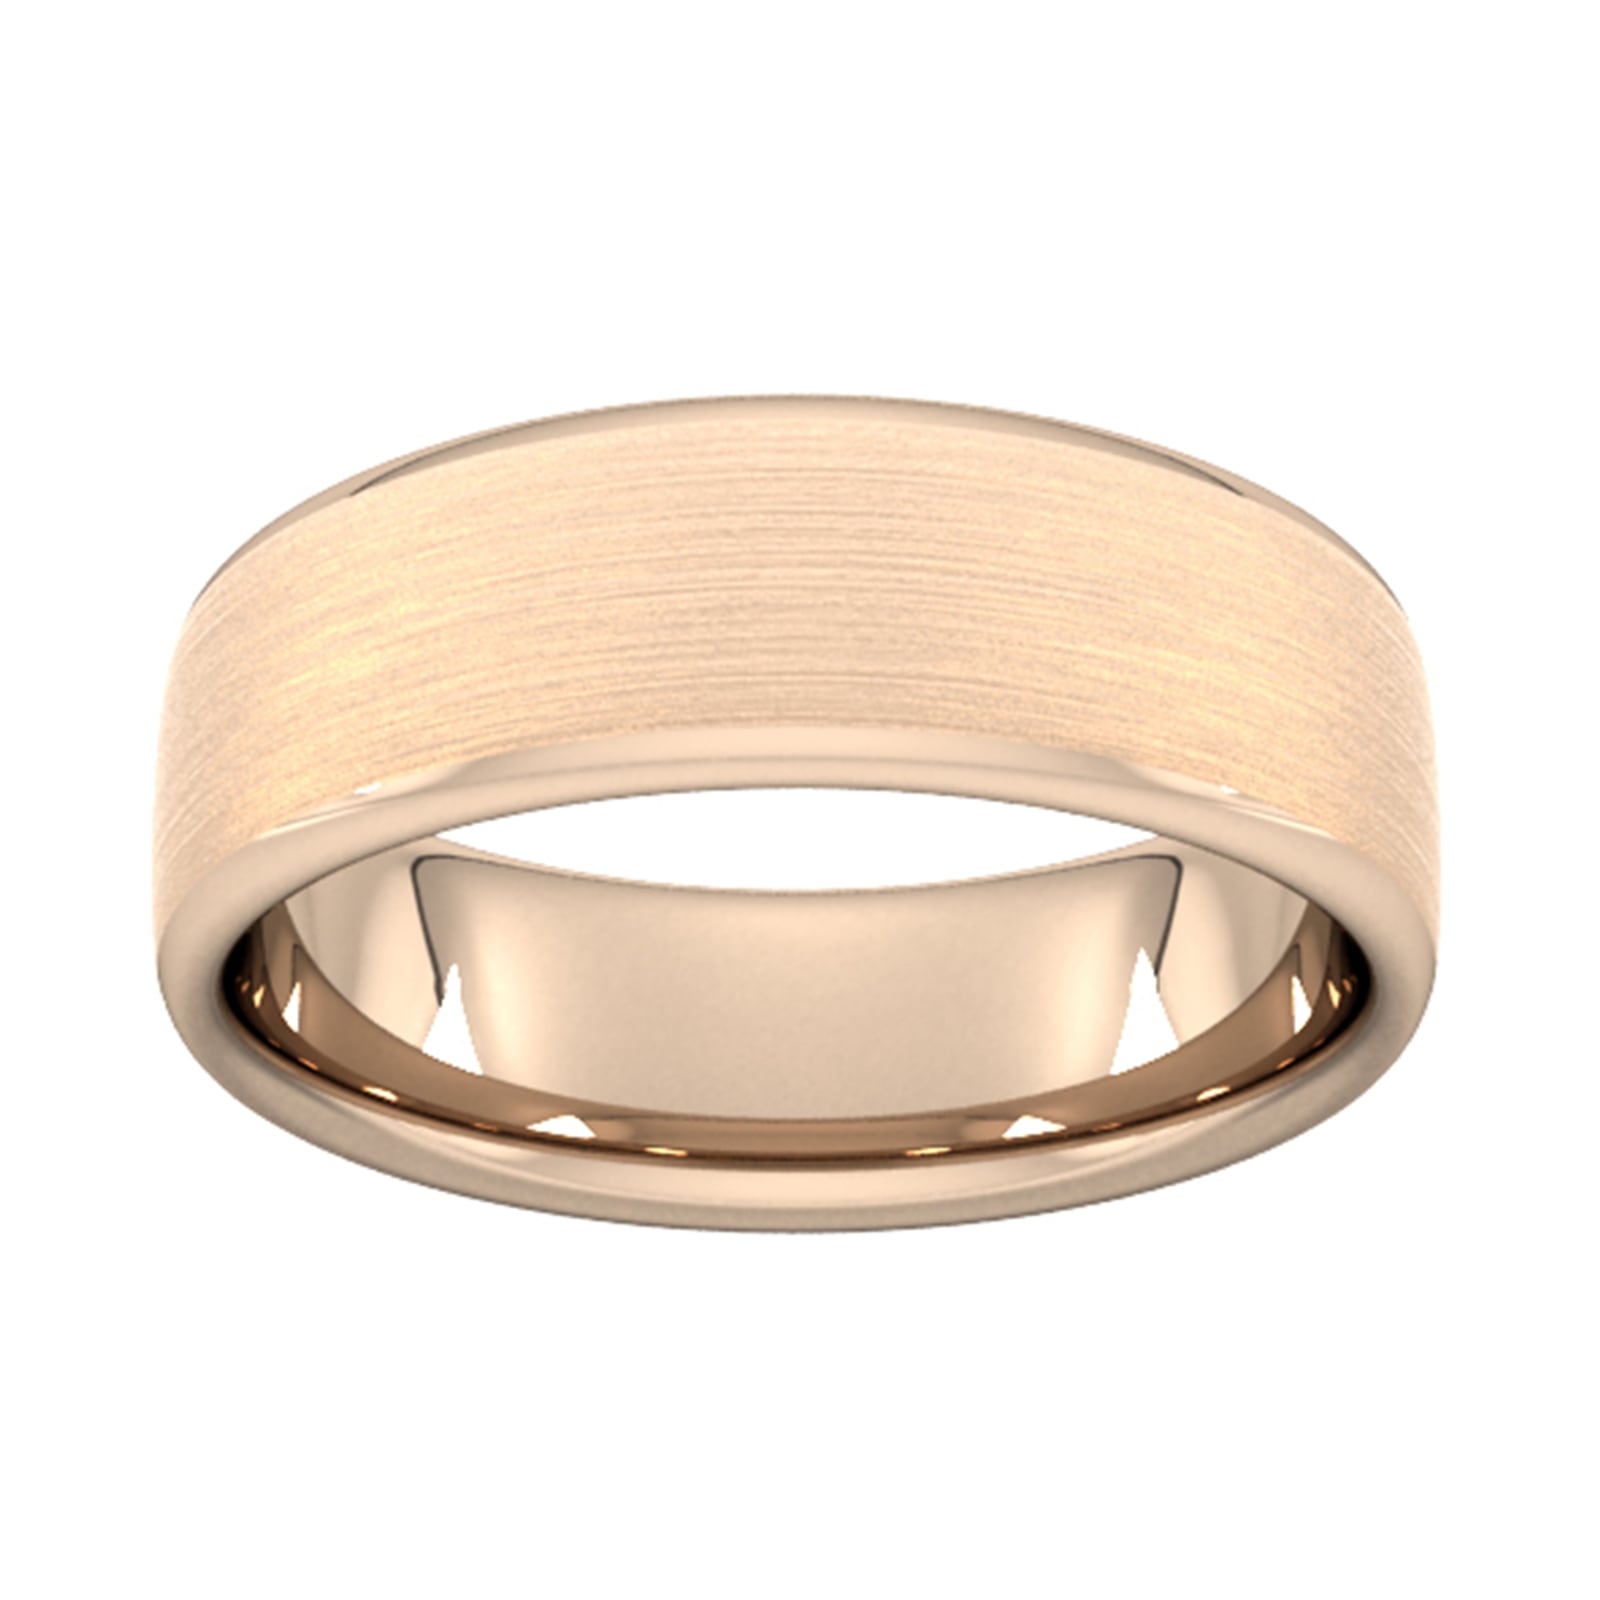 7mm D Shape Heavy Matt Finished Wedding Ring In 9 Carat Rose Gold - Ring Size P